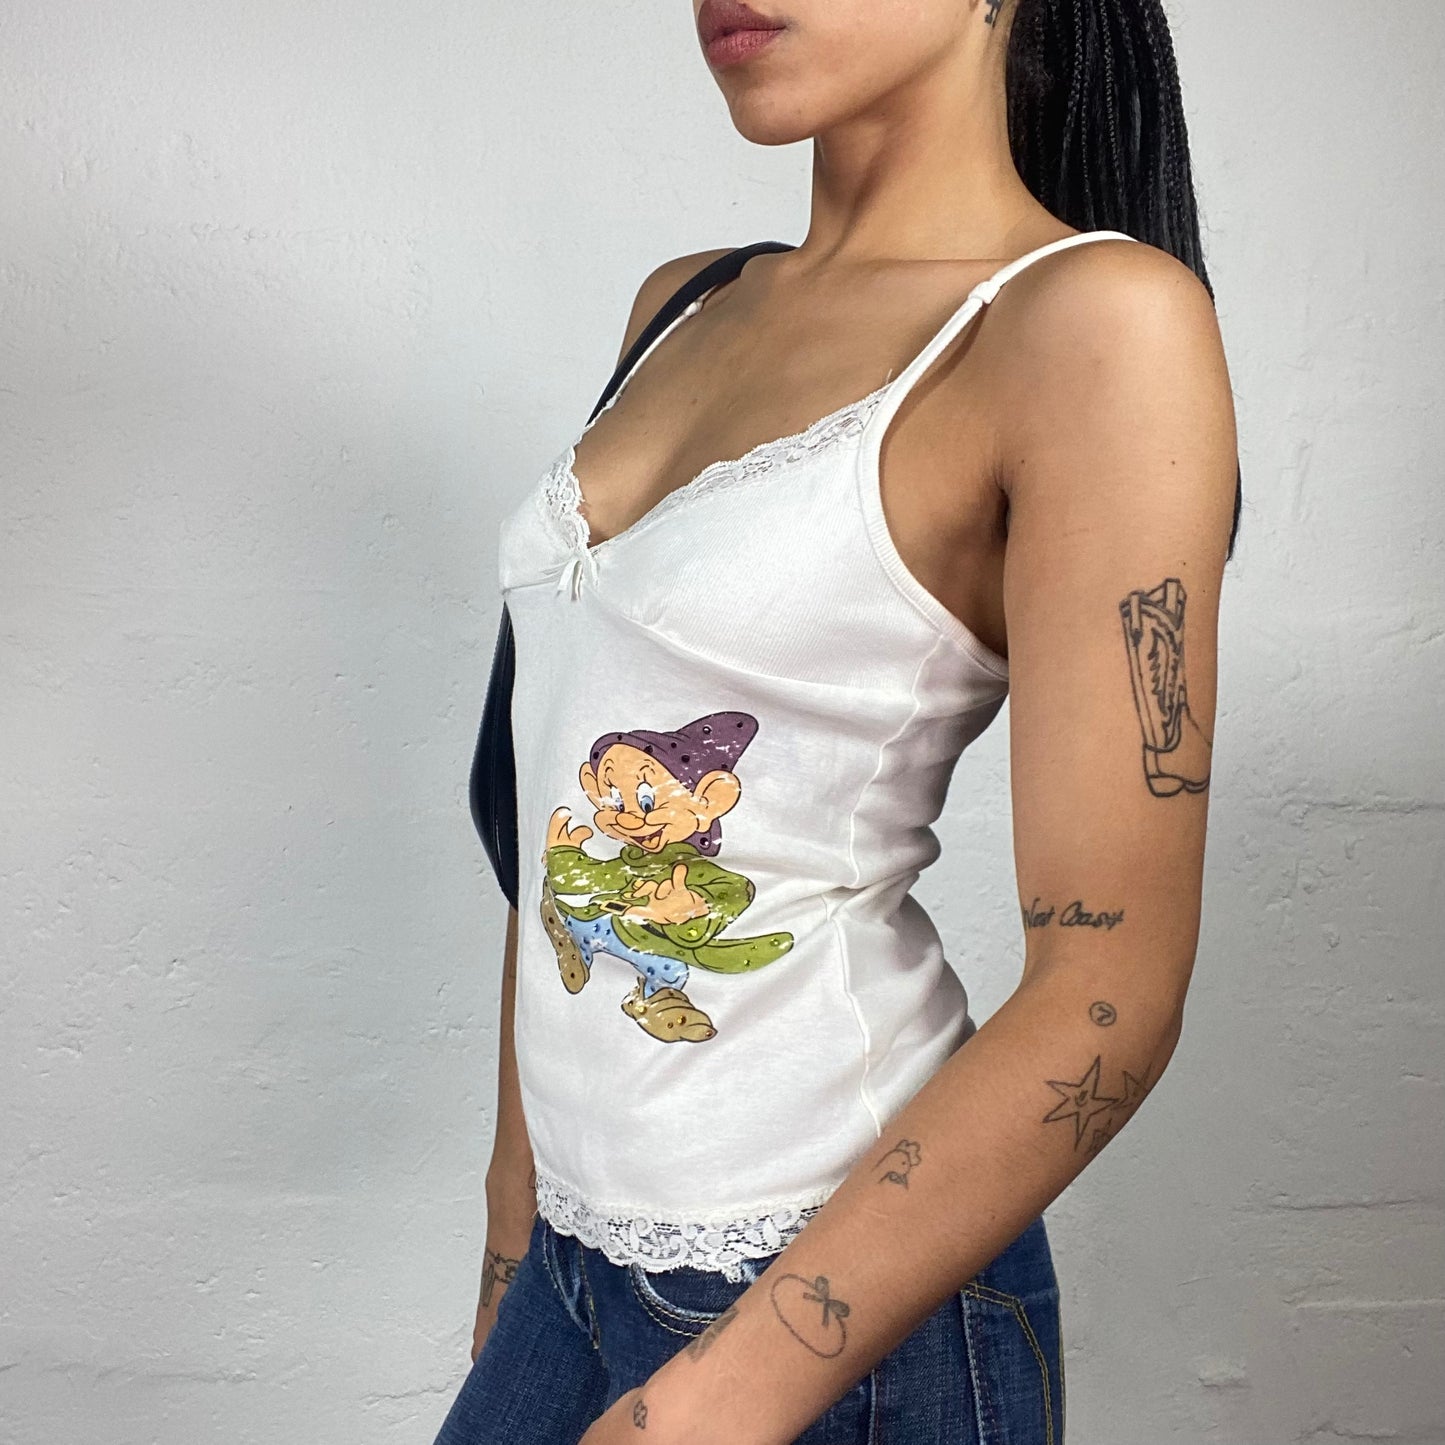 Vintage 2000's Summer Cute White Cami Top with Lace Decorated Trim and Snow White Cartoon Print (M)